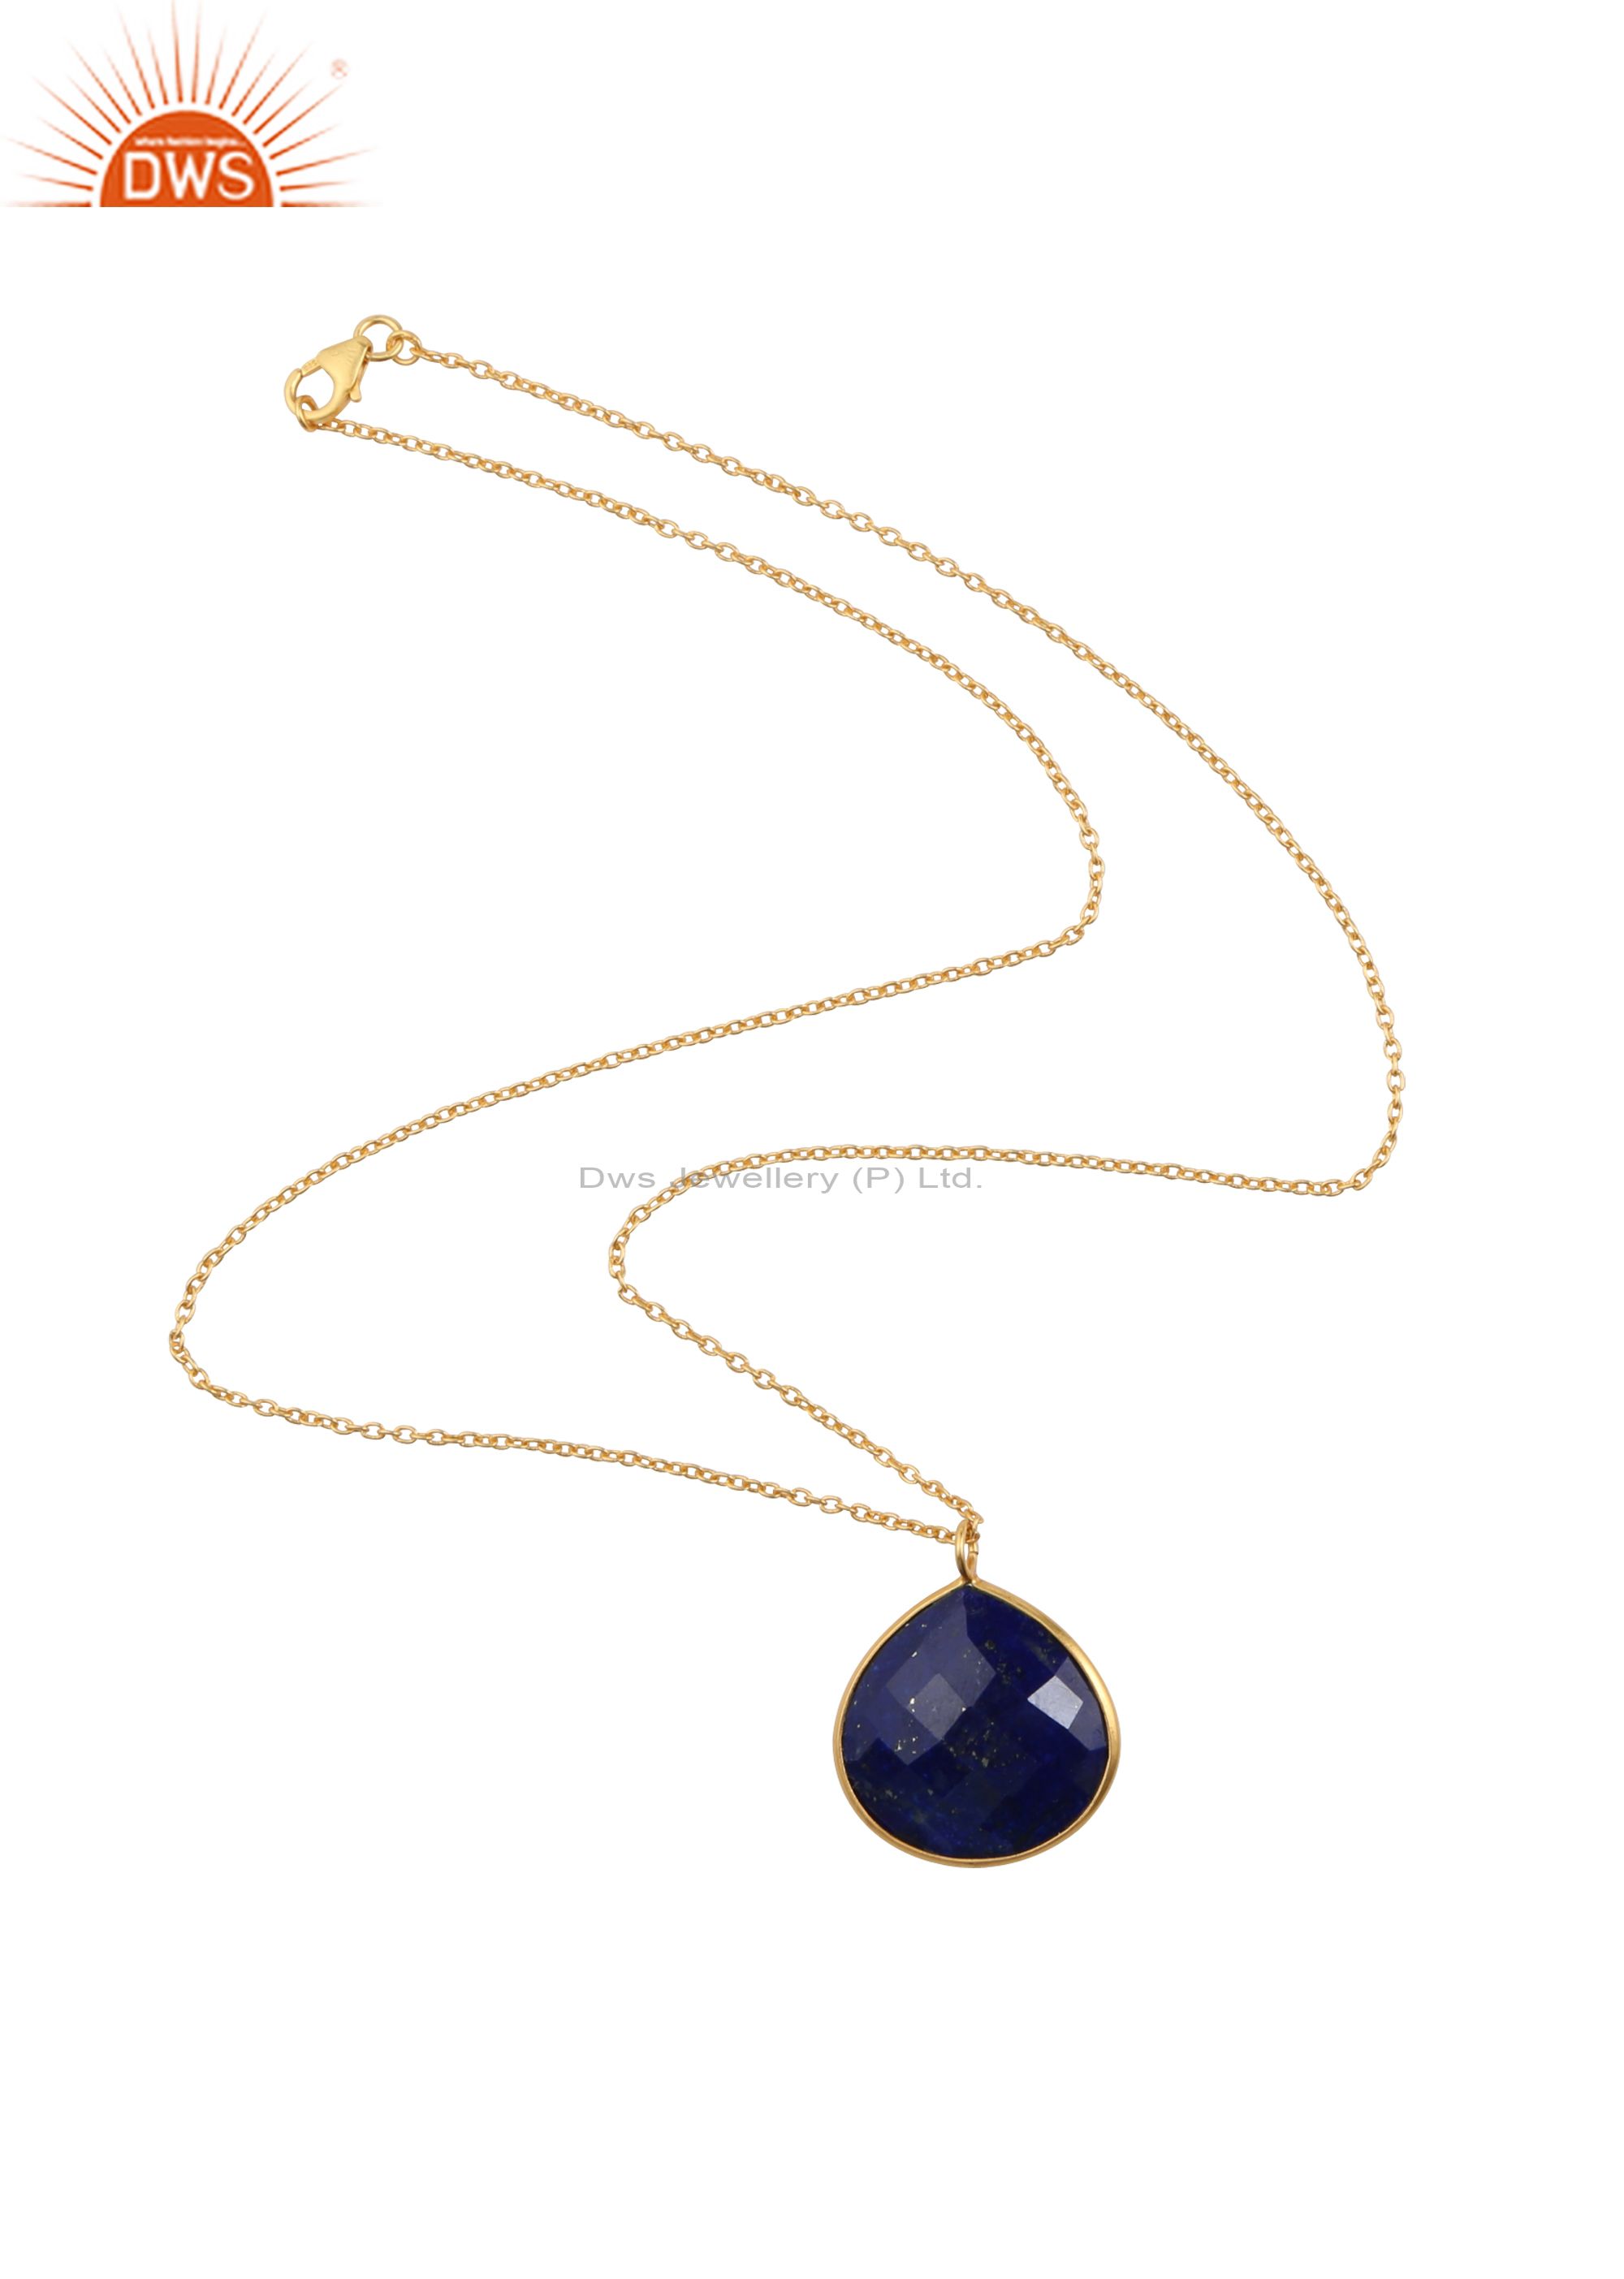 22k yellow gold plated sterling silver lapis lazuli bezel set pendant with chain